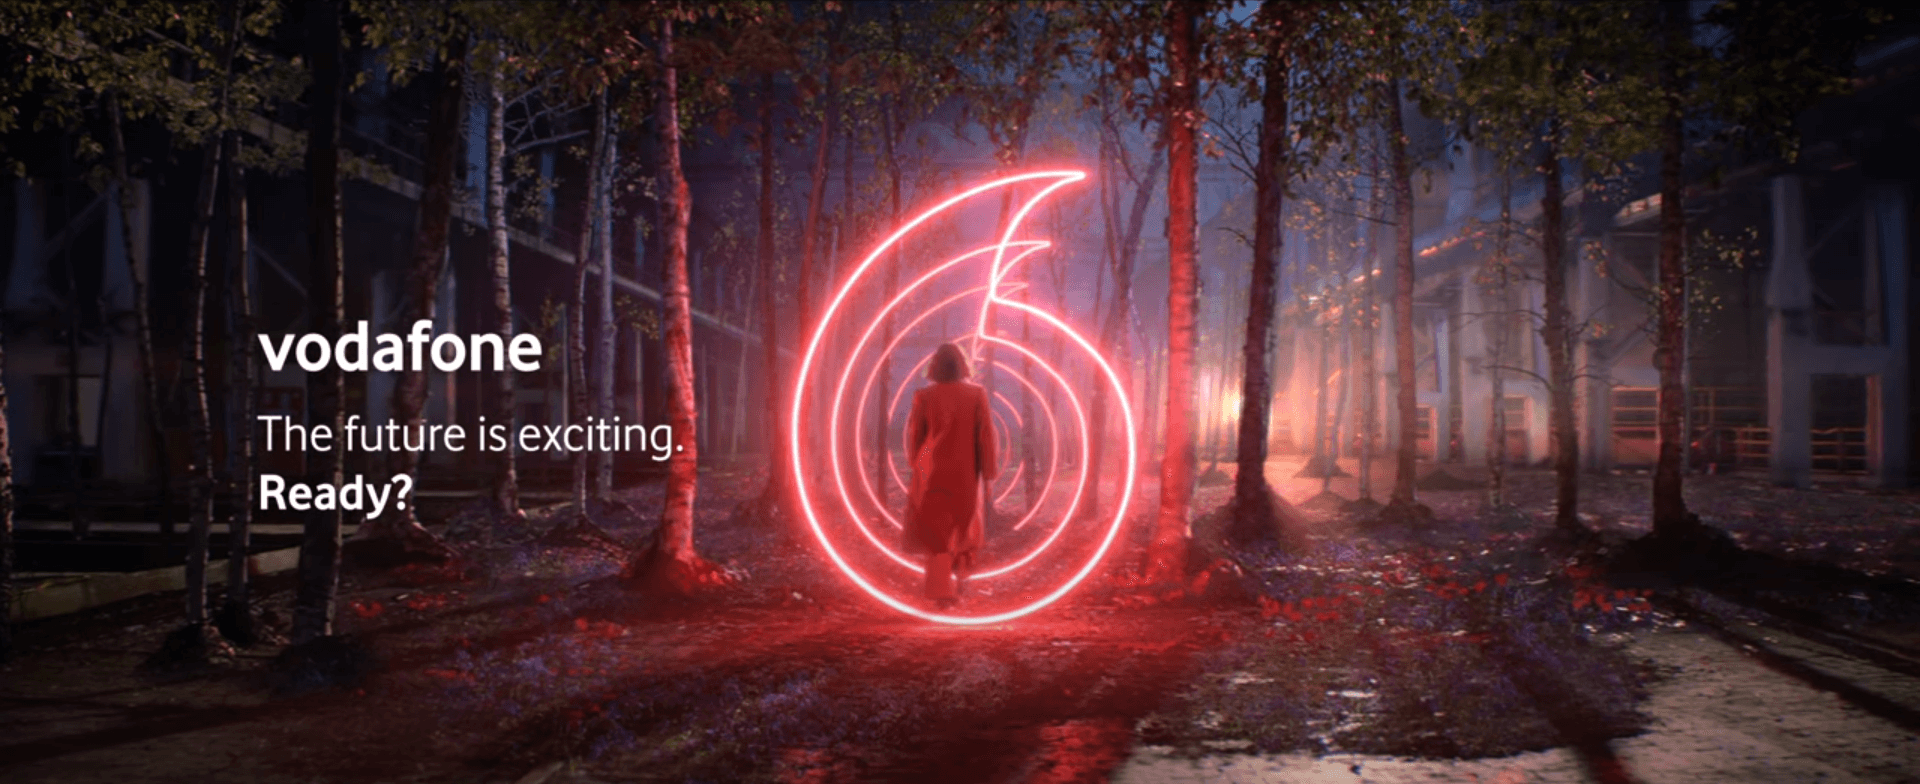 vodafone storytelling campaign example